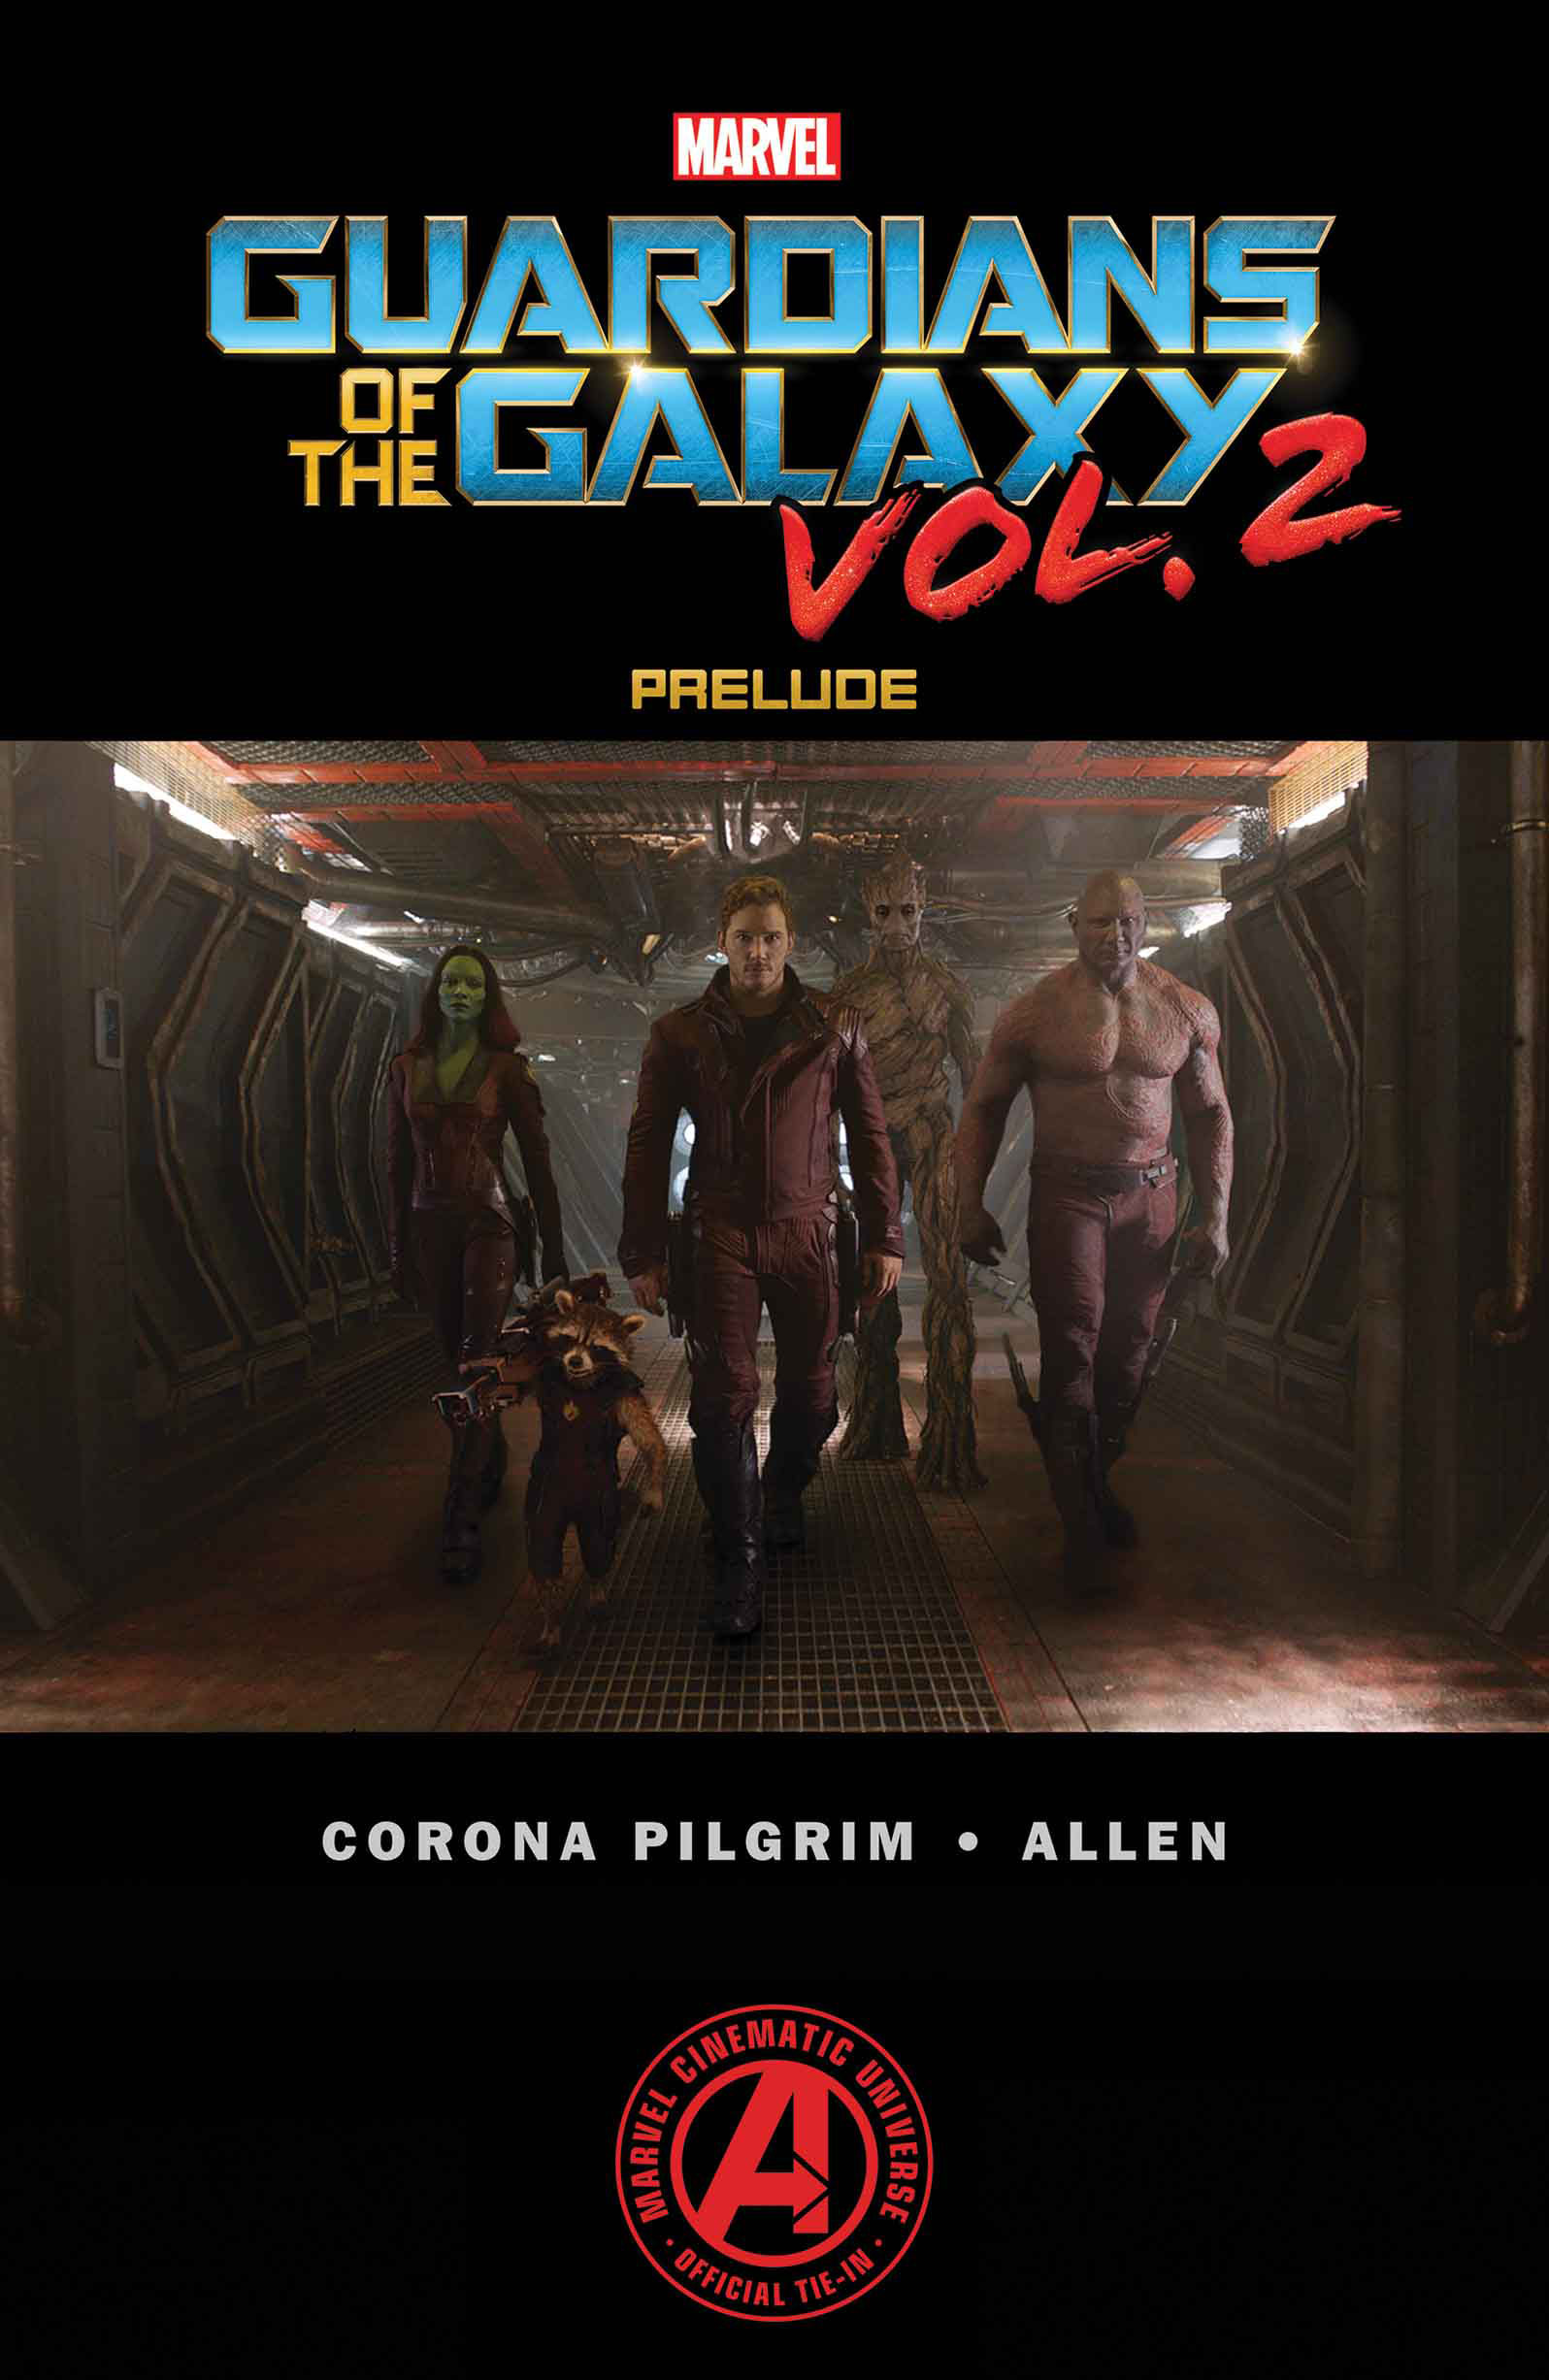 MARVEL’S GUARDIANS OF THE GALAXY VOL. 2 PRELUDE #2 (of 2)